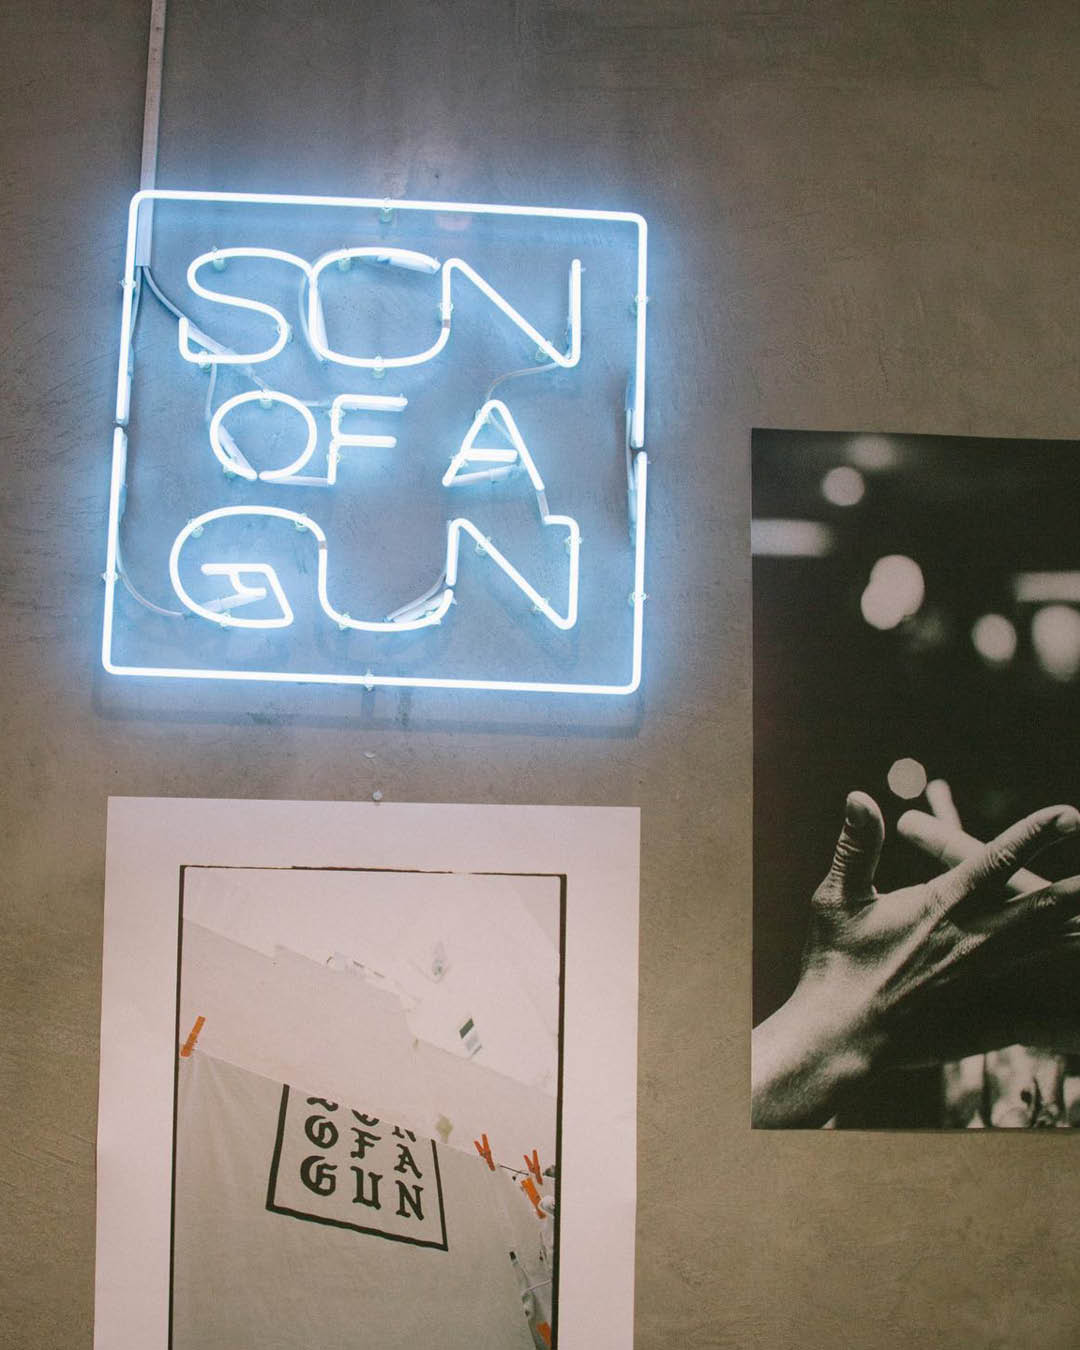 An interior detail of Son of a Gun shop in Lisbon, including a neon blue sign of their name.